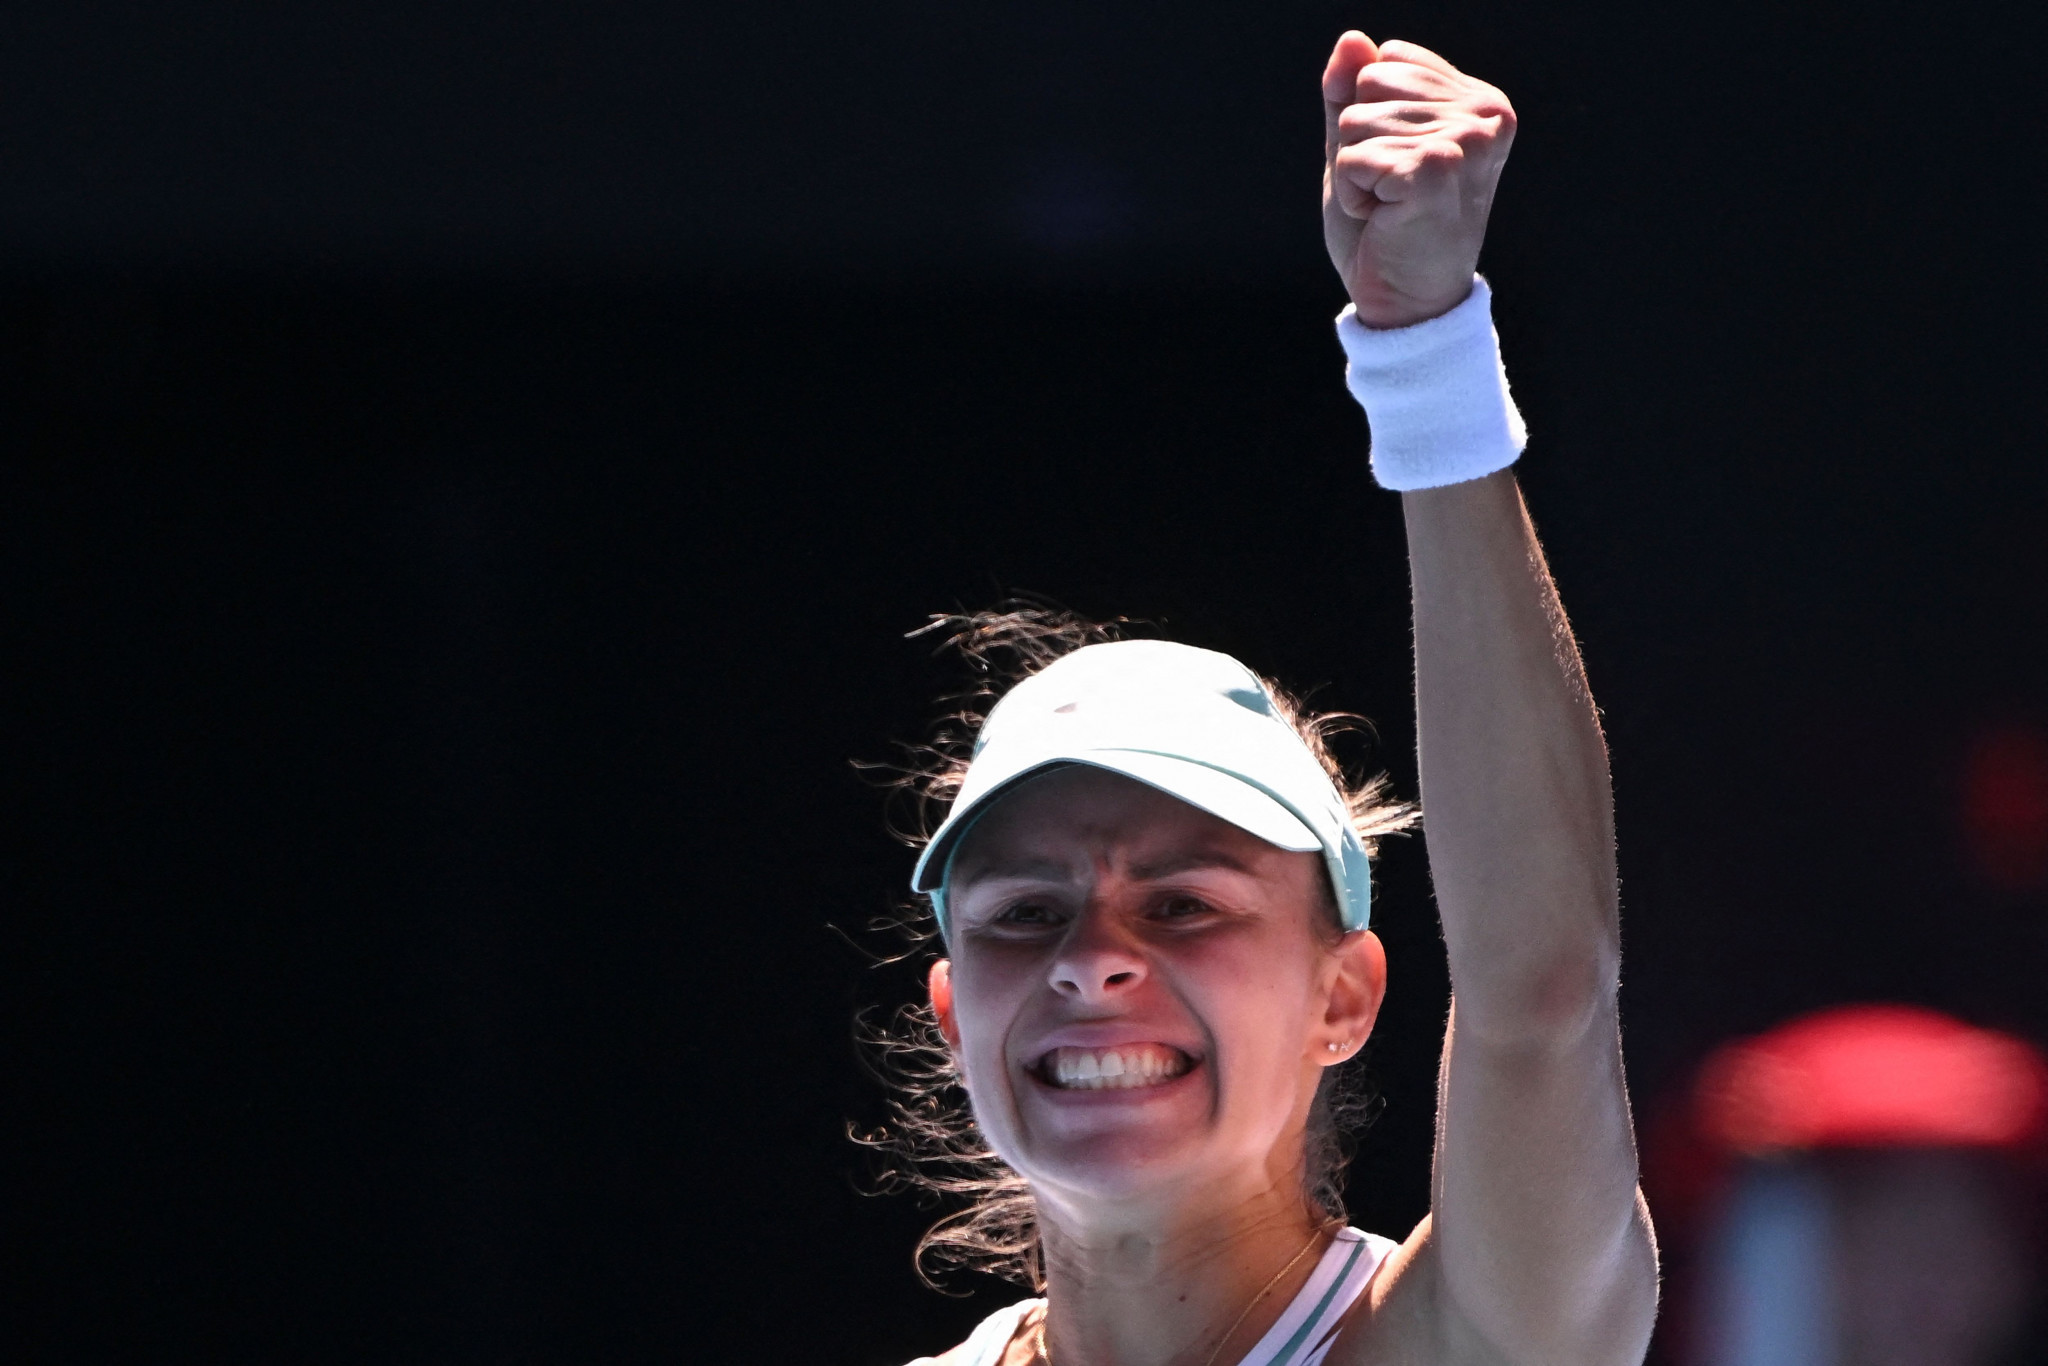 Poland's Magda Linette is into the women's quarter-finals of the Australian Open after defeating another top seed in Melbourne ©Getty Images